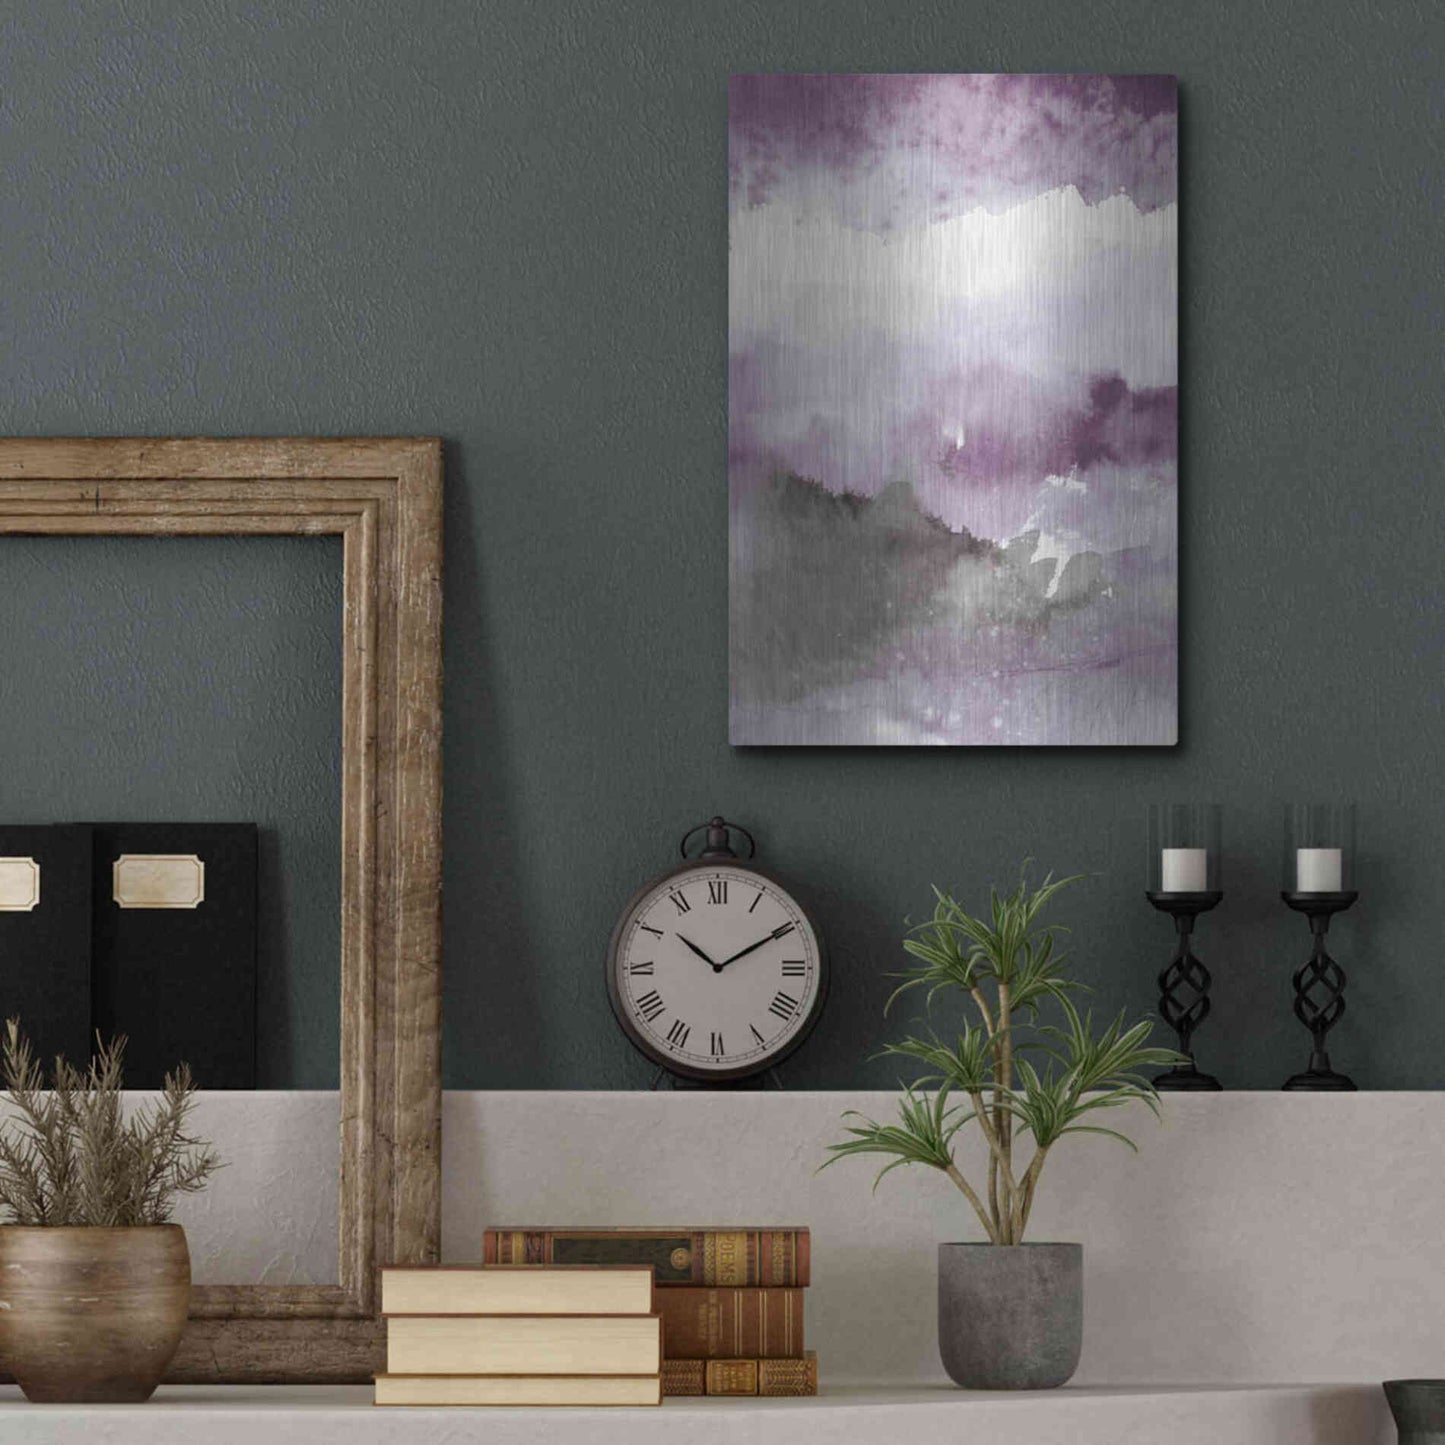 Luxe Metal Art 'Midnight At The Lake III Amethyst Gray Crop' by Mike Schick, Metal Wall Art,12x16